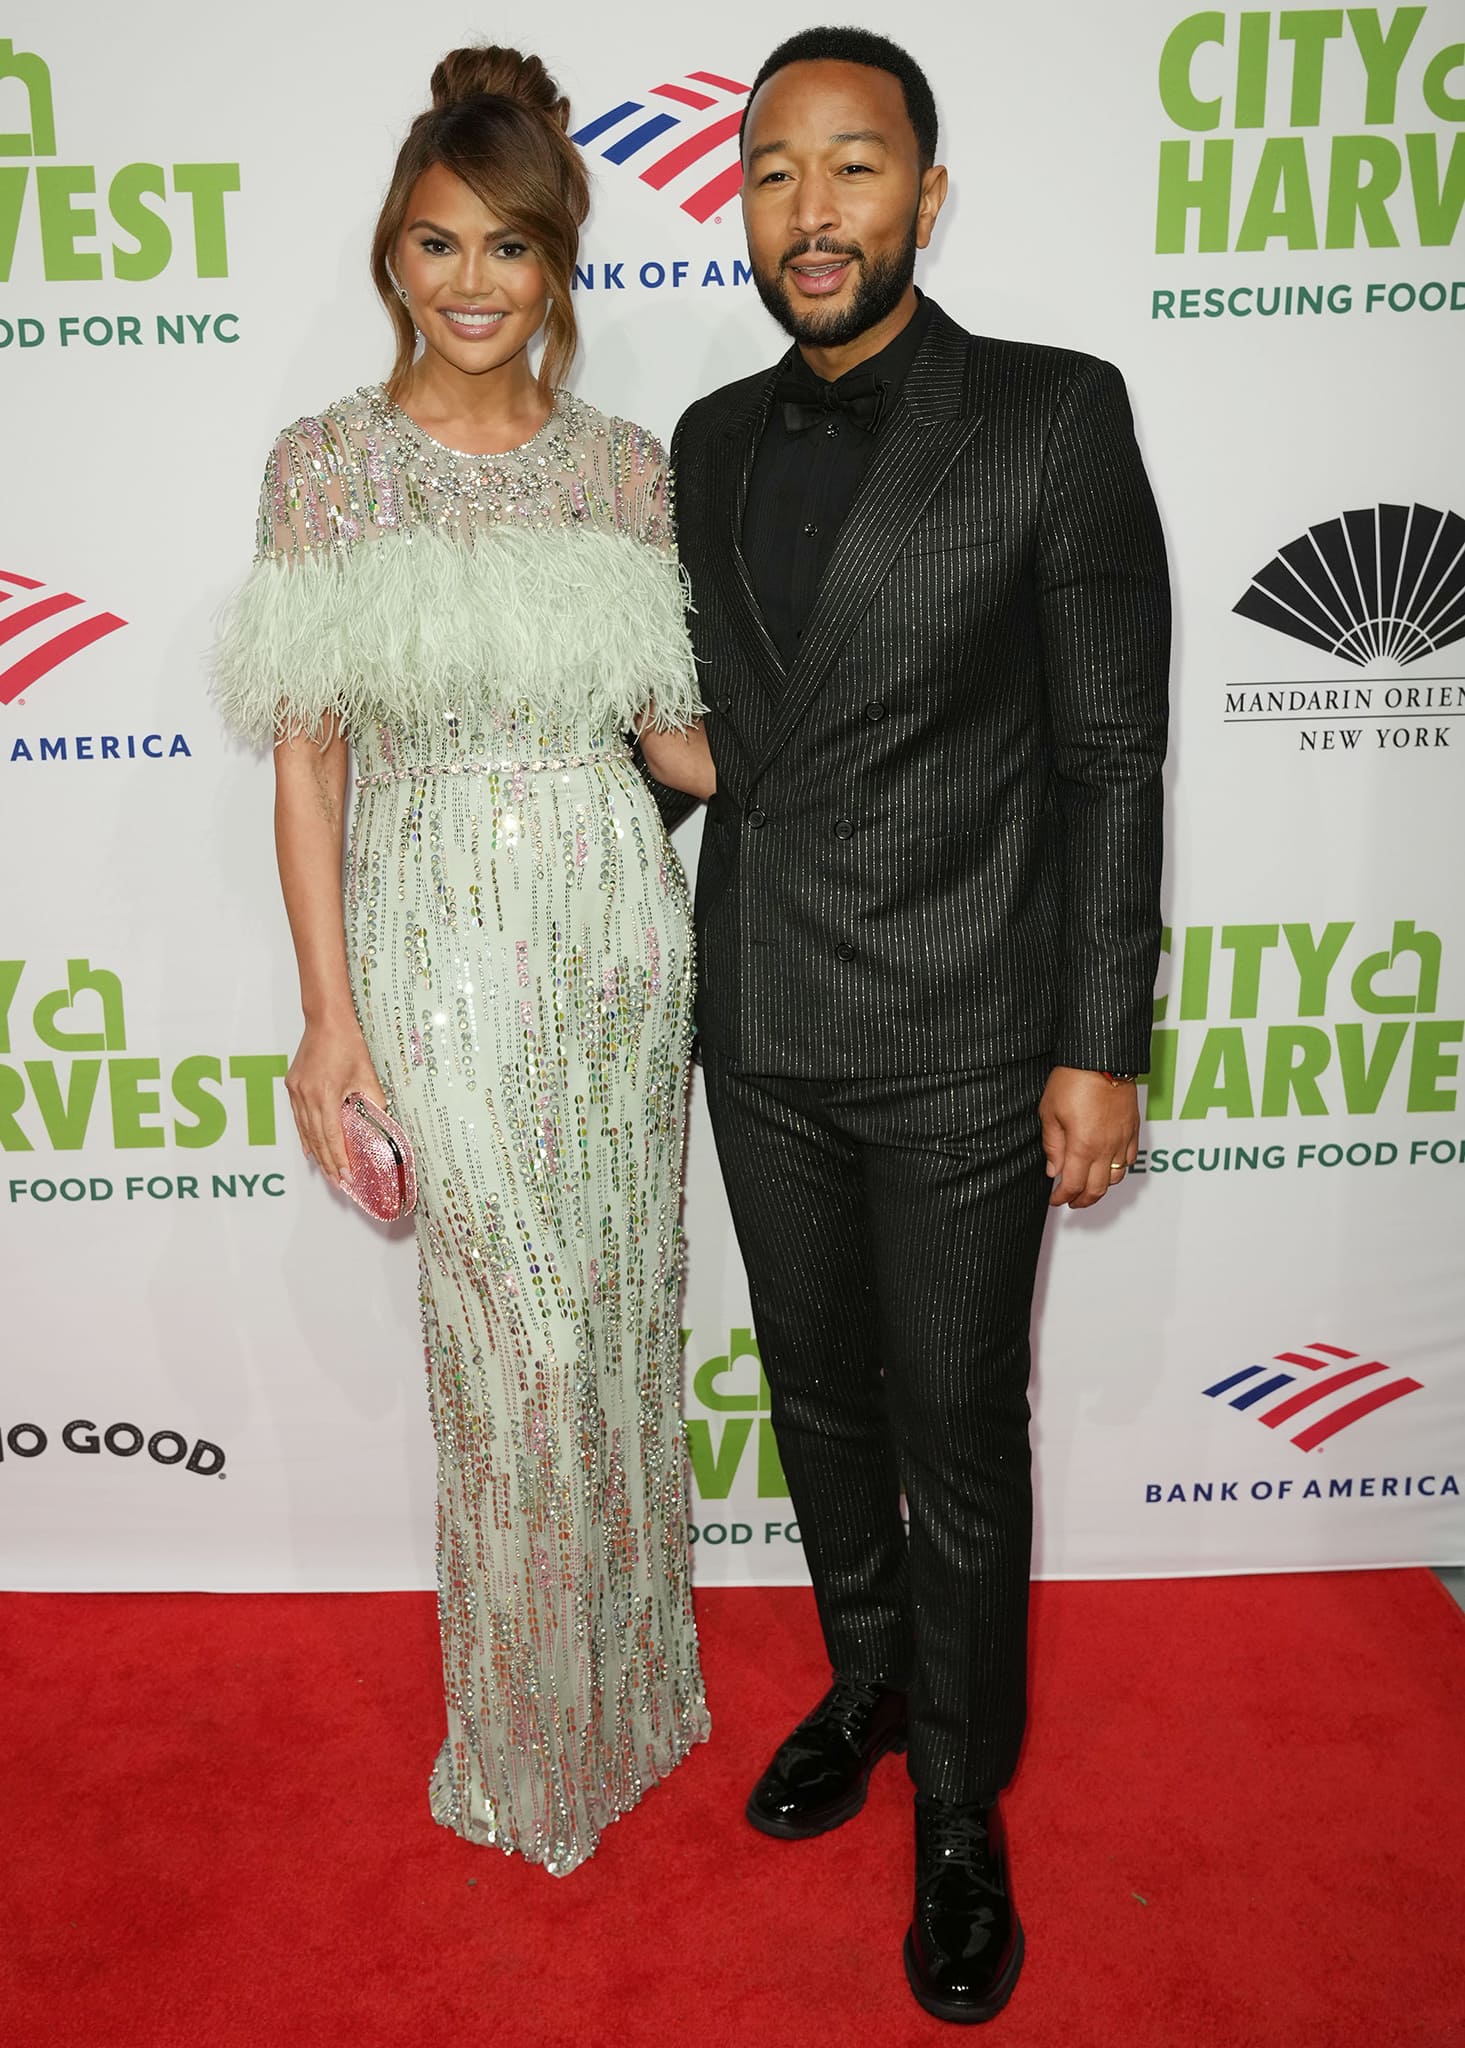 Chrissy Teigen and John Legend at the 2022 City Harvest Red Supper Club benefit gala held at Cipriani 42nd Street in New York City on April 26, 2022